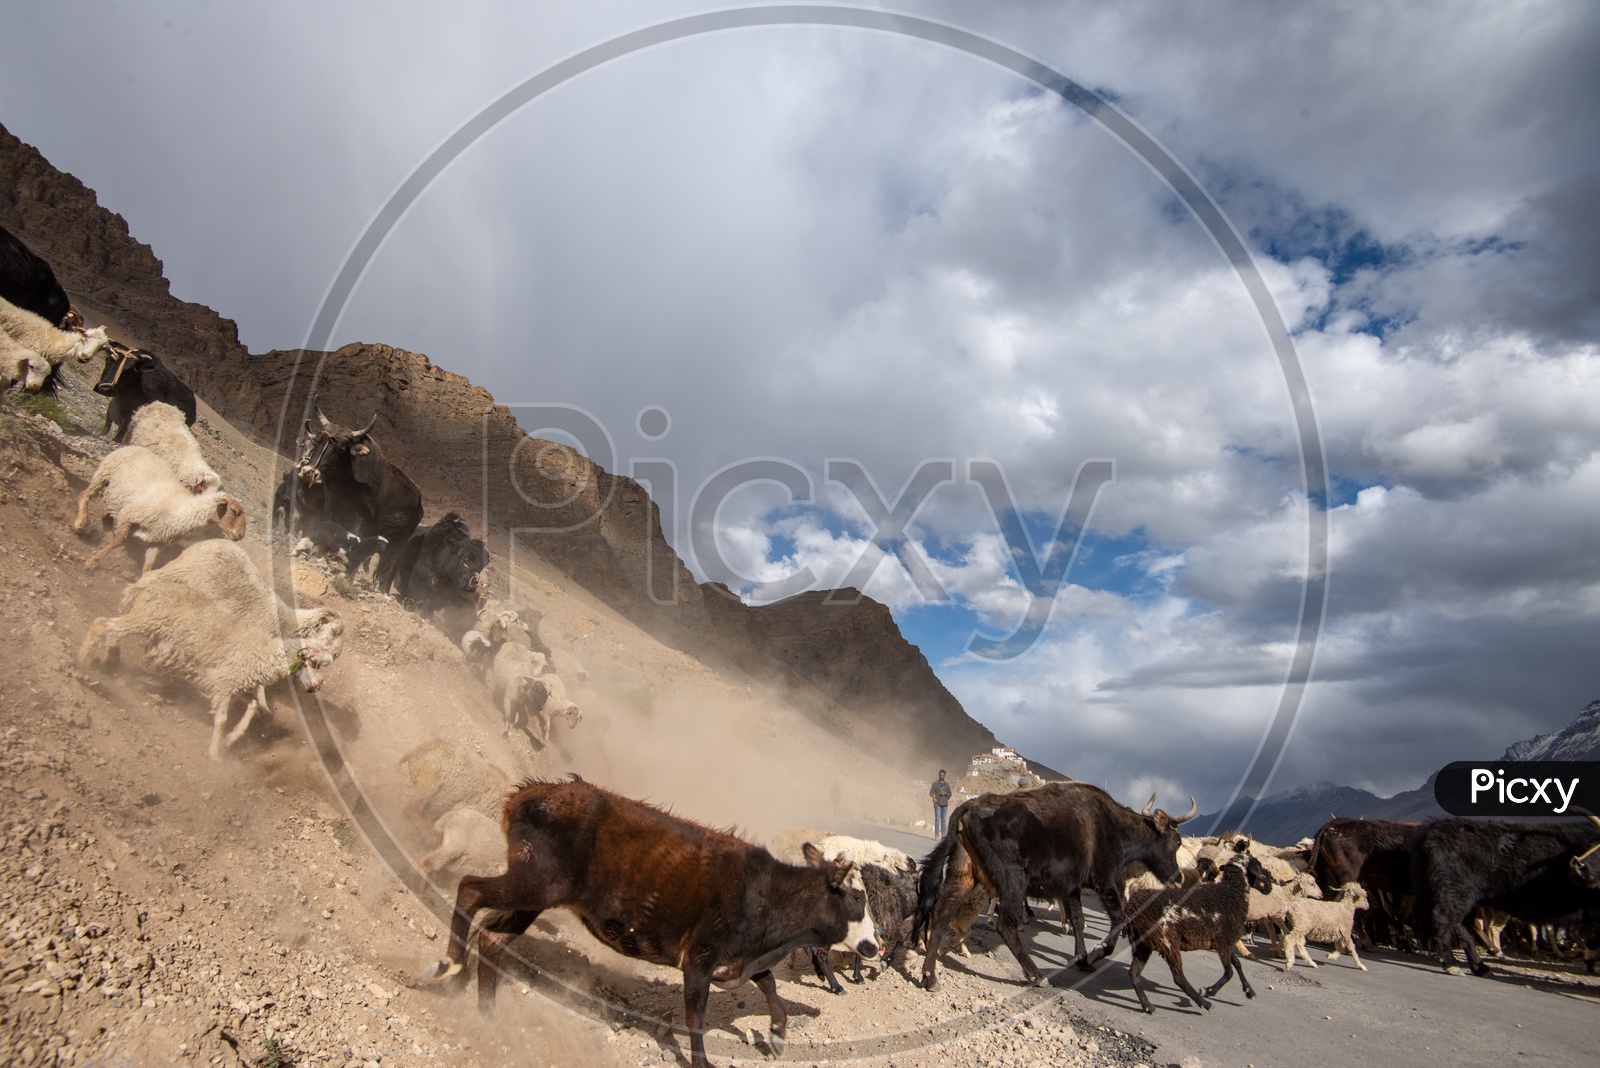 Sheep and cattle crossing the road in Spiti Valley